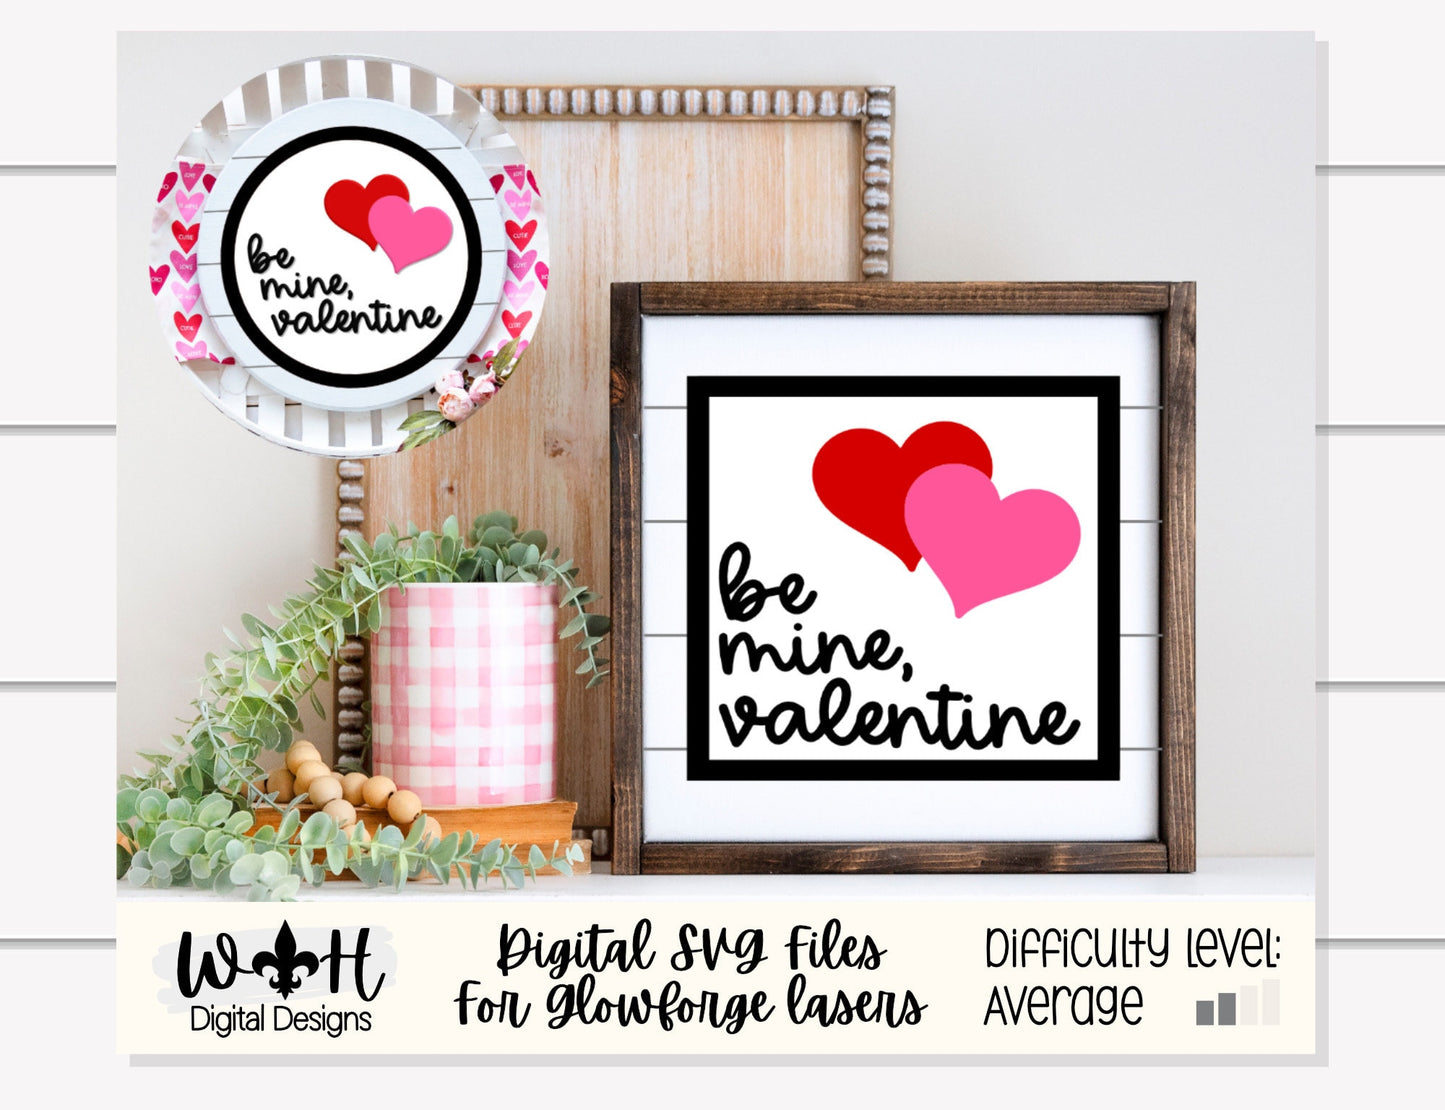 Be Mine Valentine Hearts Shiplap Shelf Sitter - Round and Square Frames - Files for Sign Making - SVG Cut File For Glowforge - Digital File